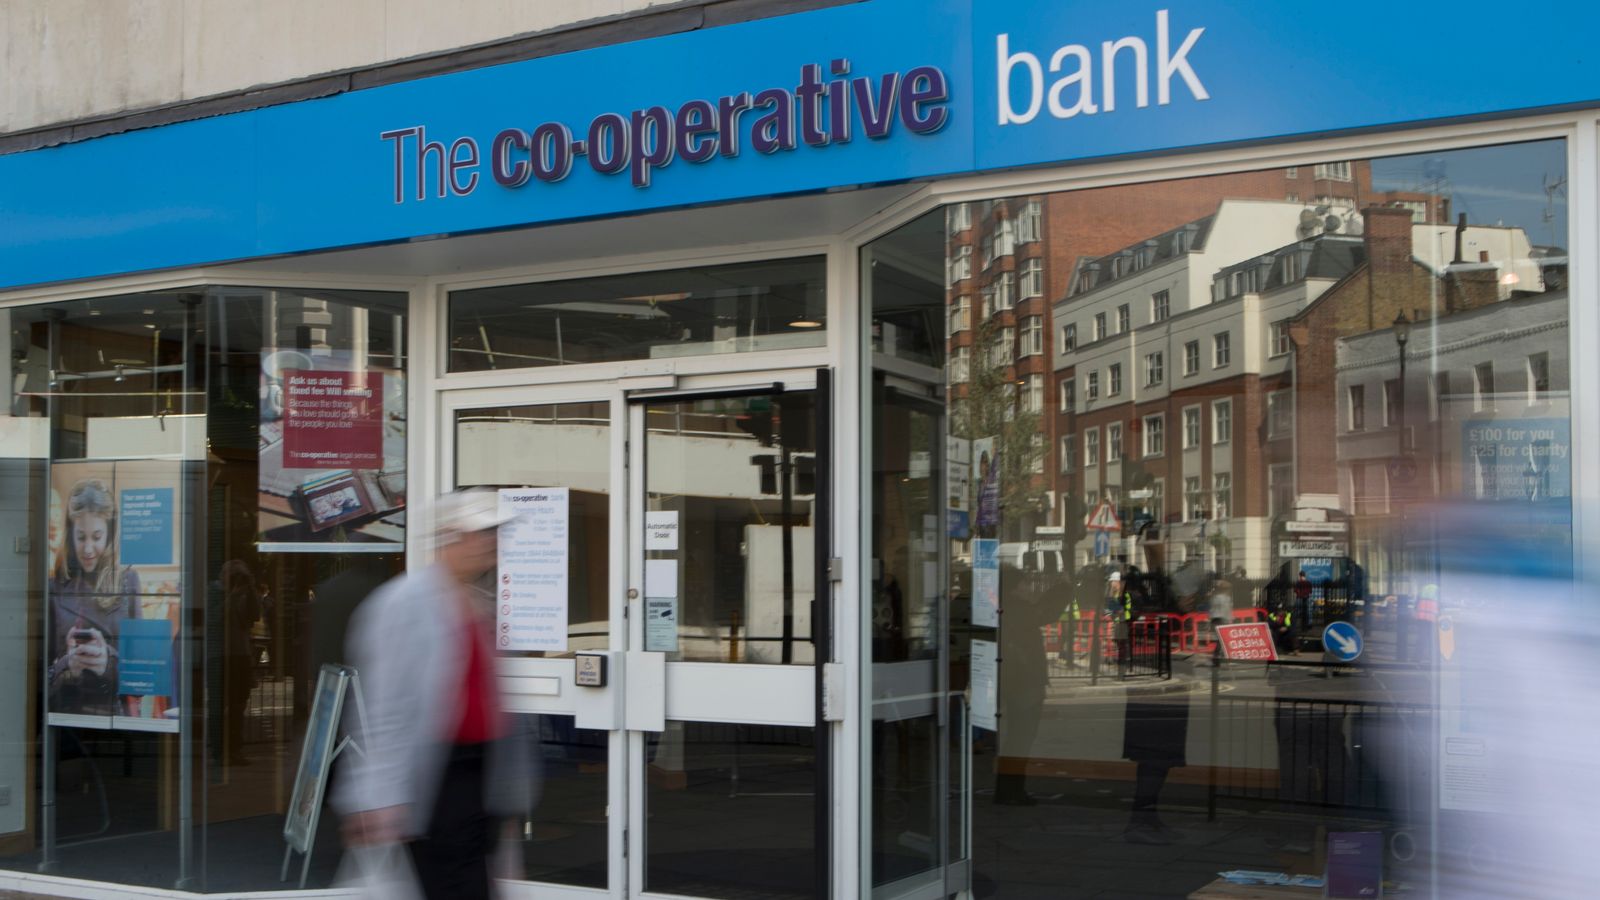 co-operative bank and coventry near agreement on landmark £780m deal